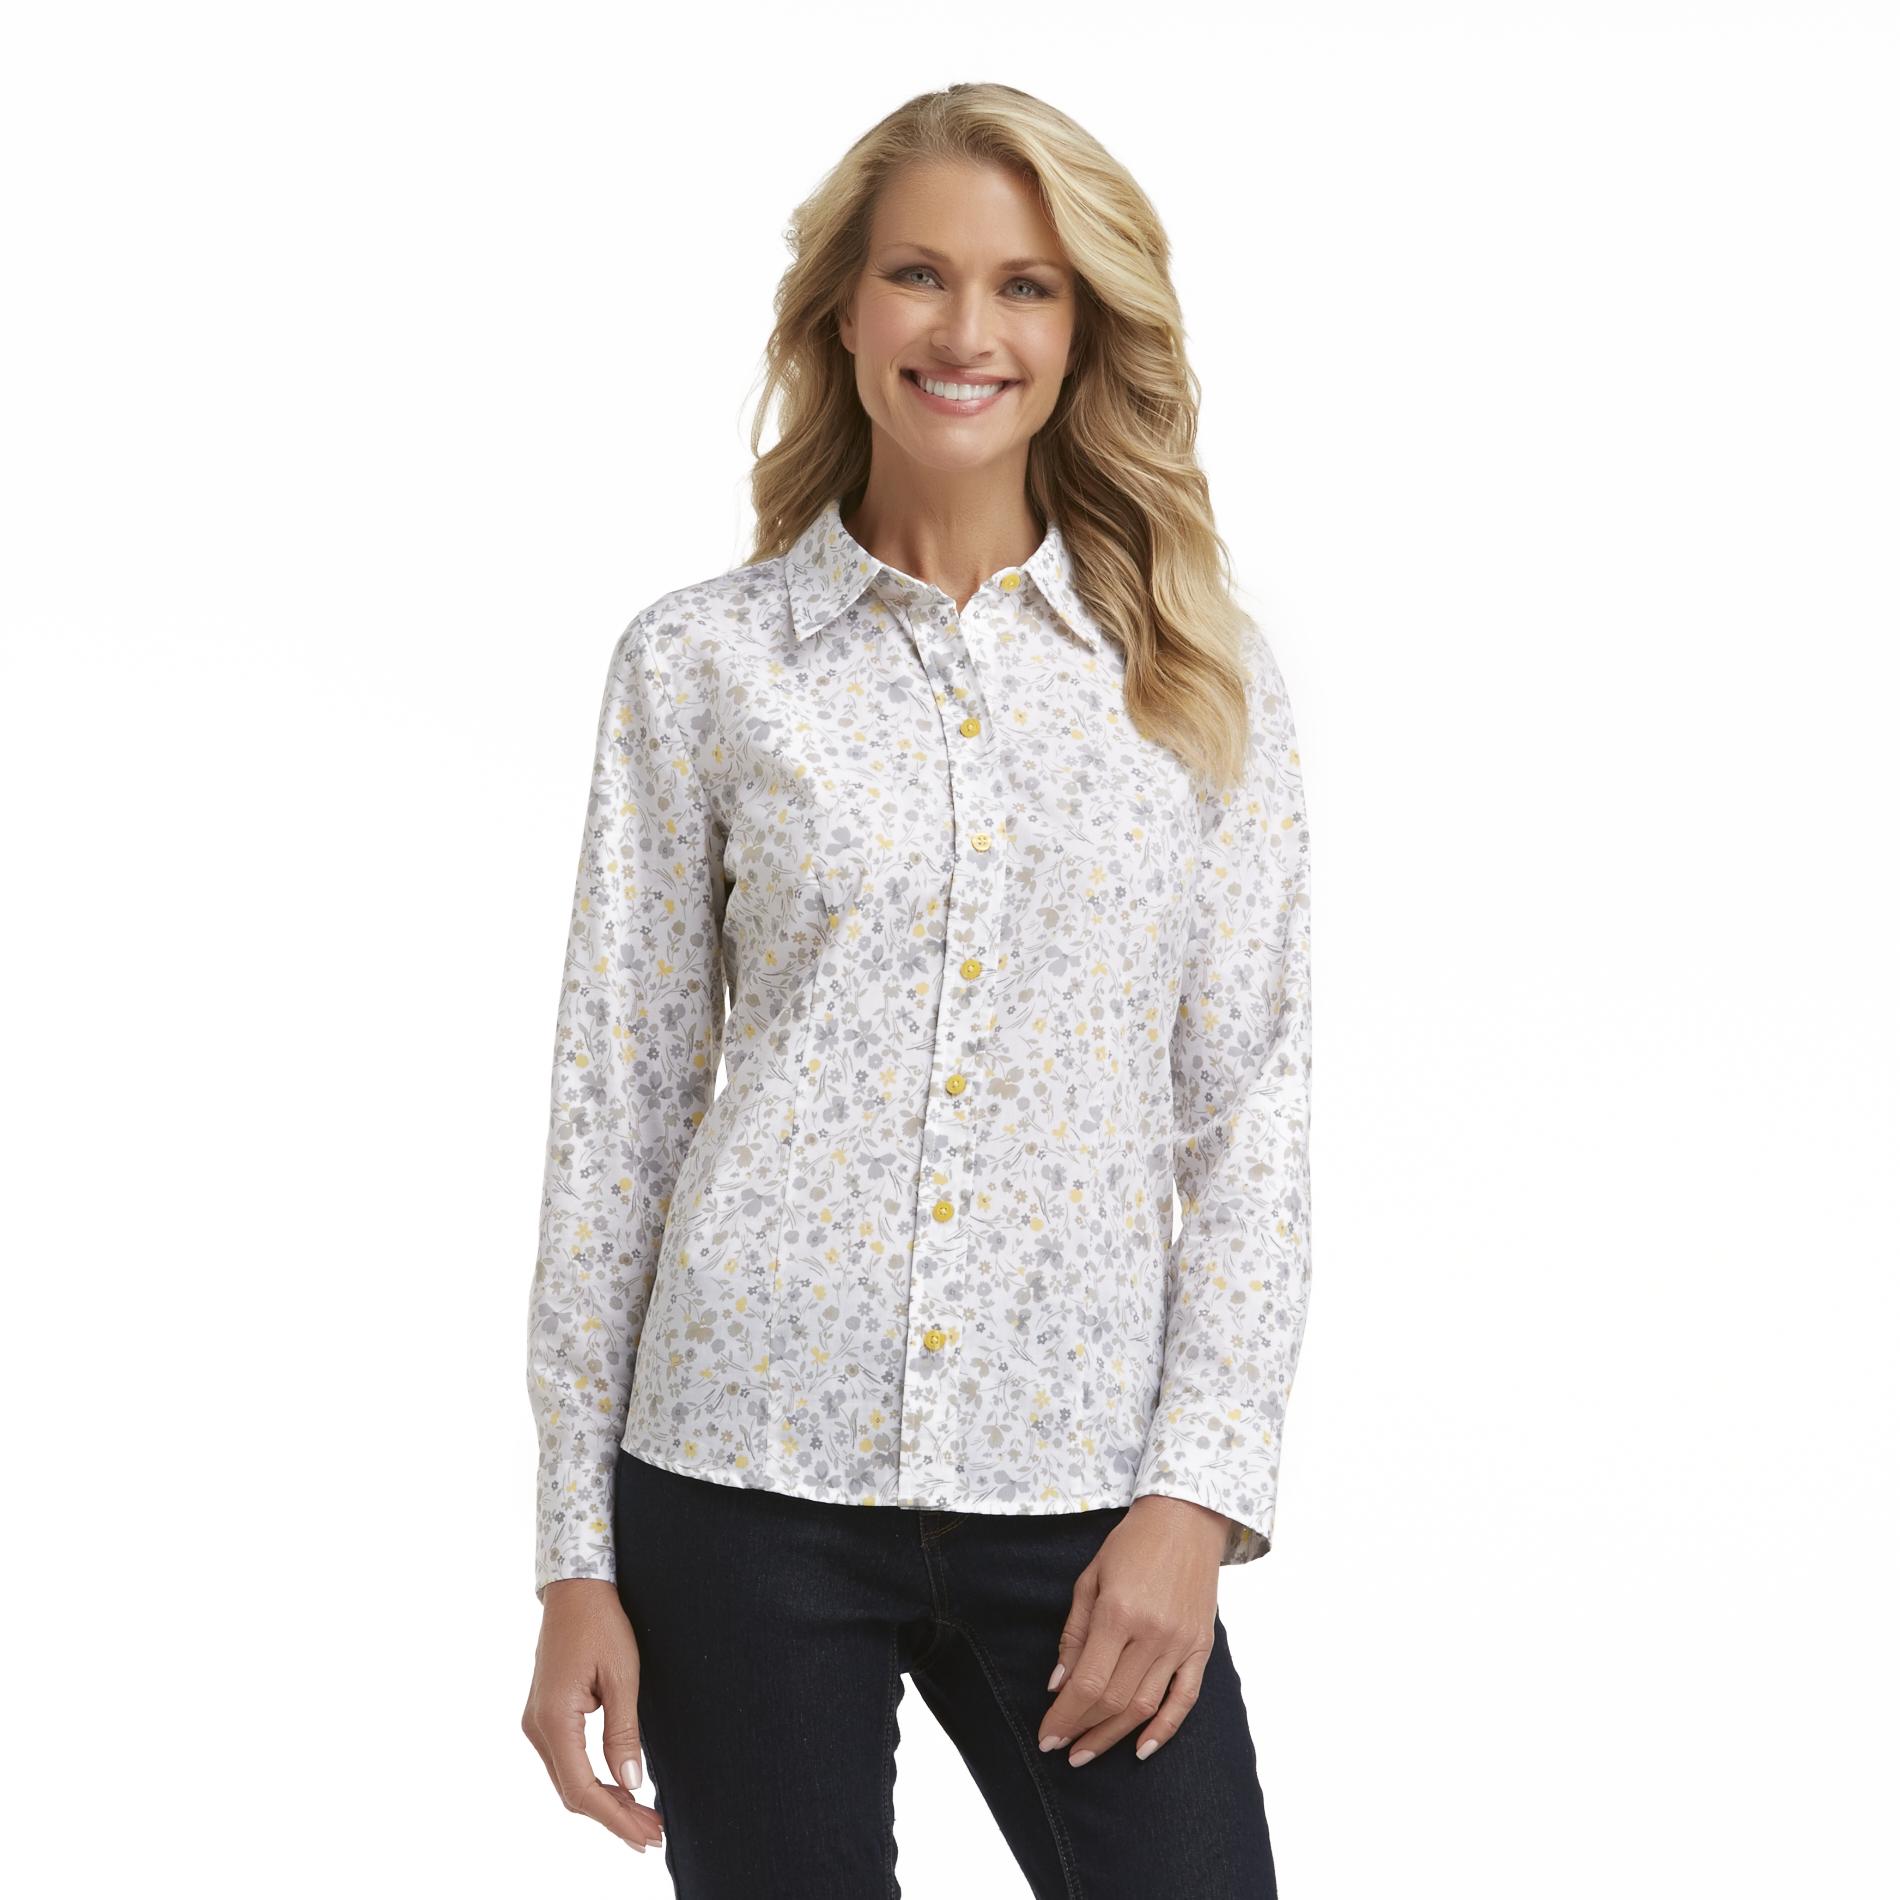 Basic Editions Women's Easy-Care Shaped Shirt - Floral